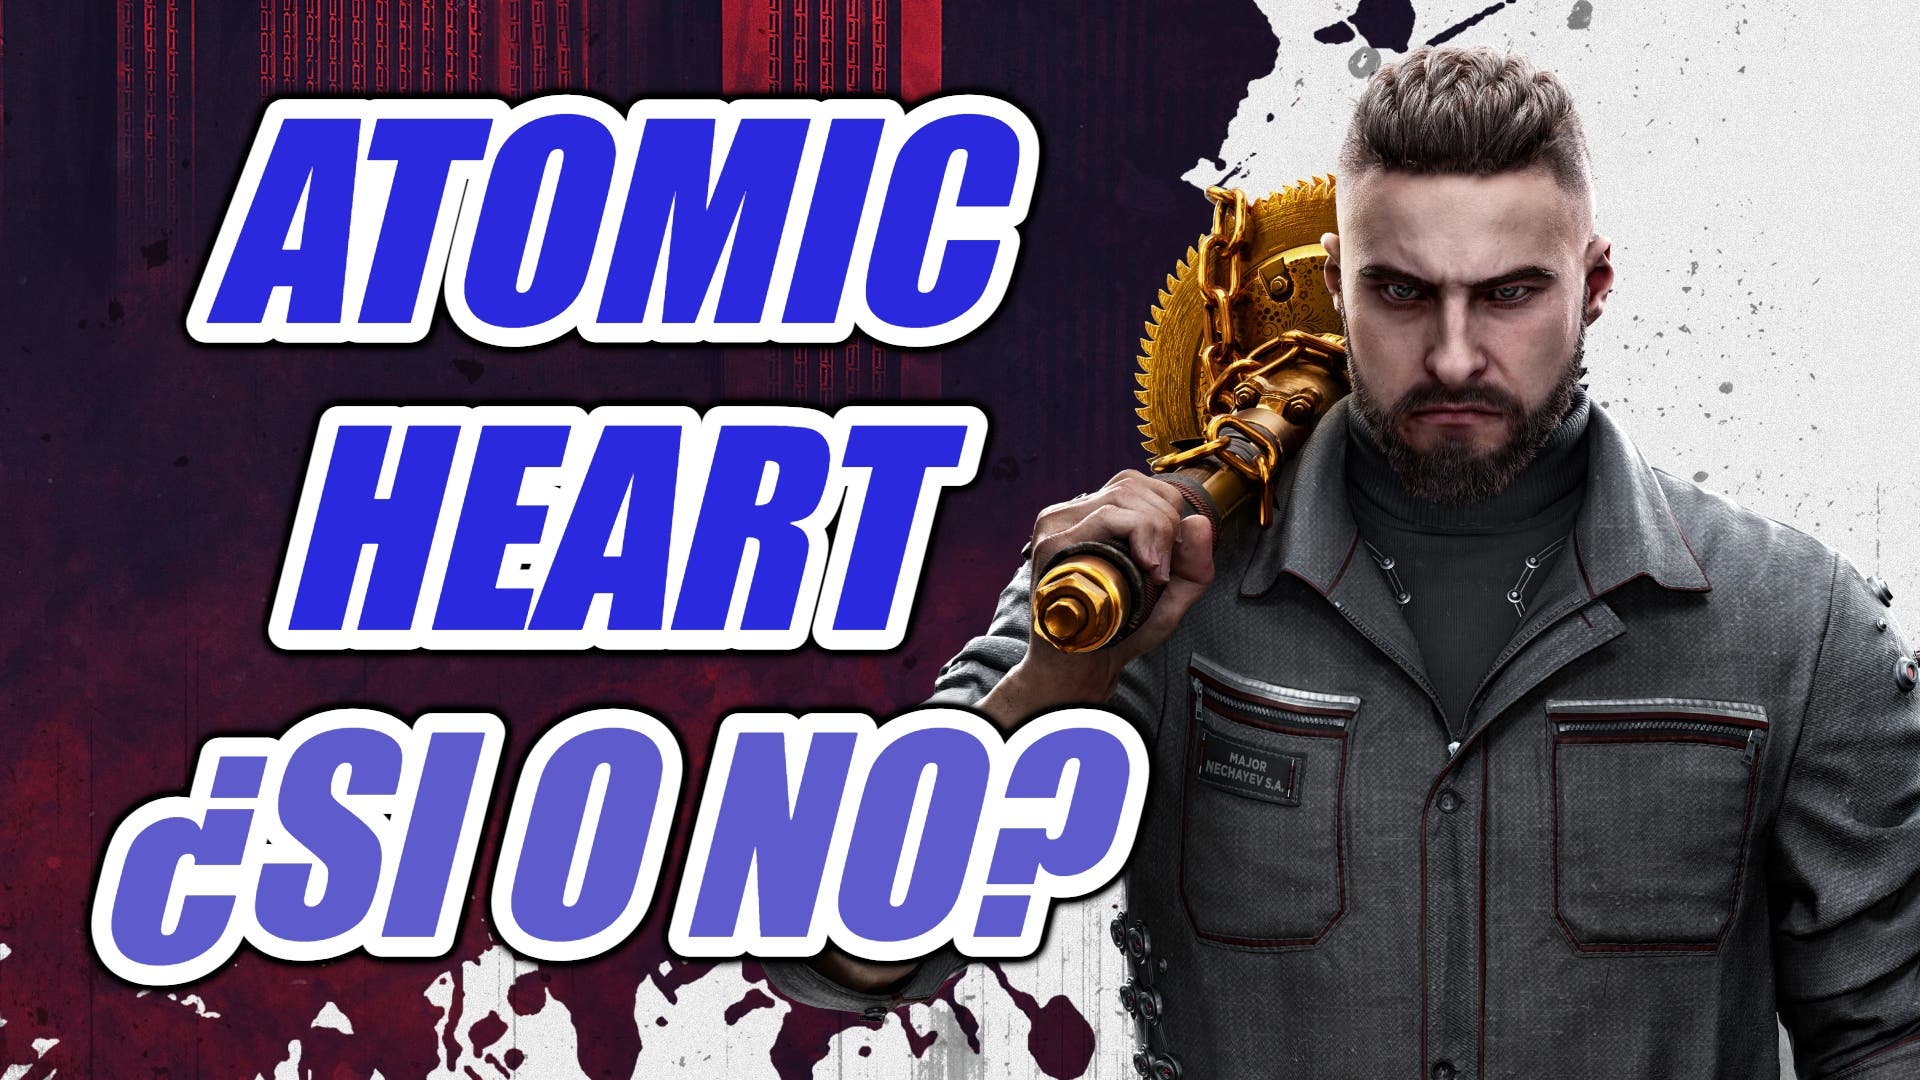 Is it worth buying Atomic Heart?  The analysis of the press shows quite clearly